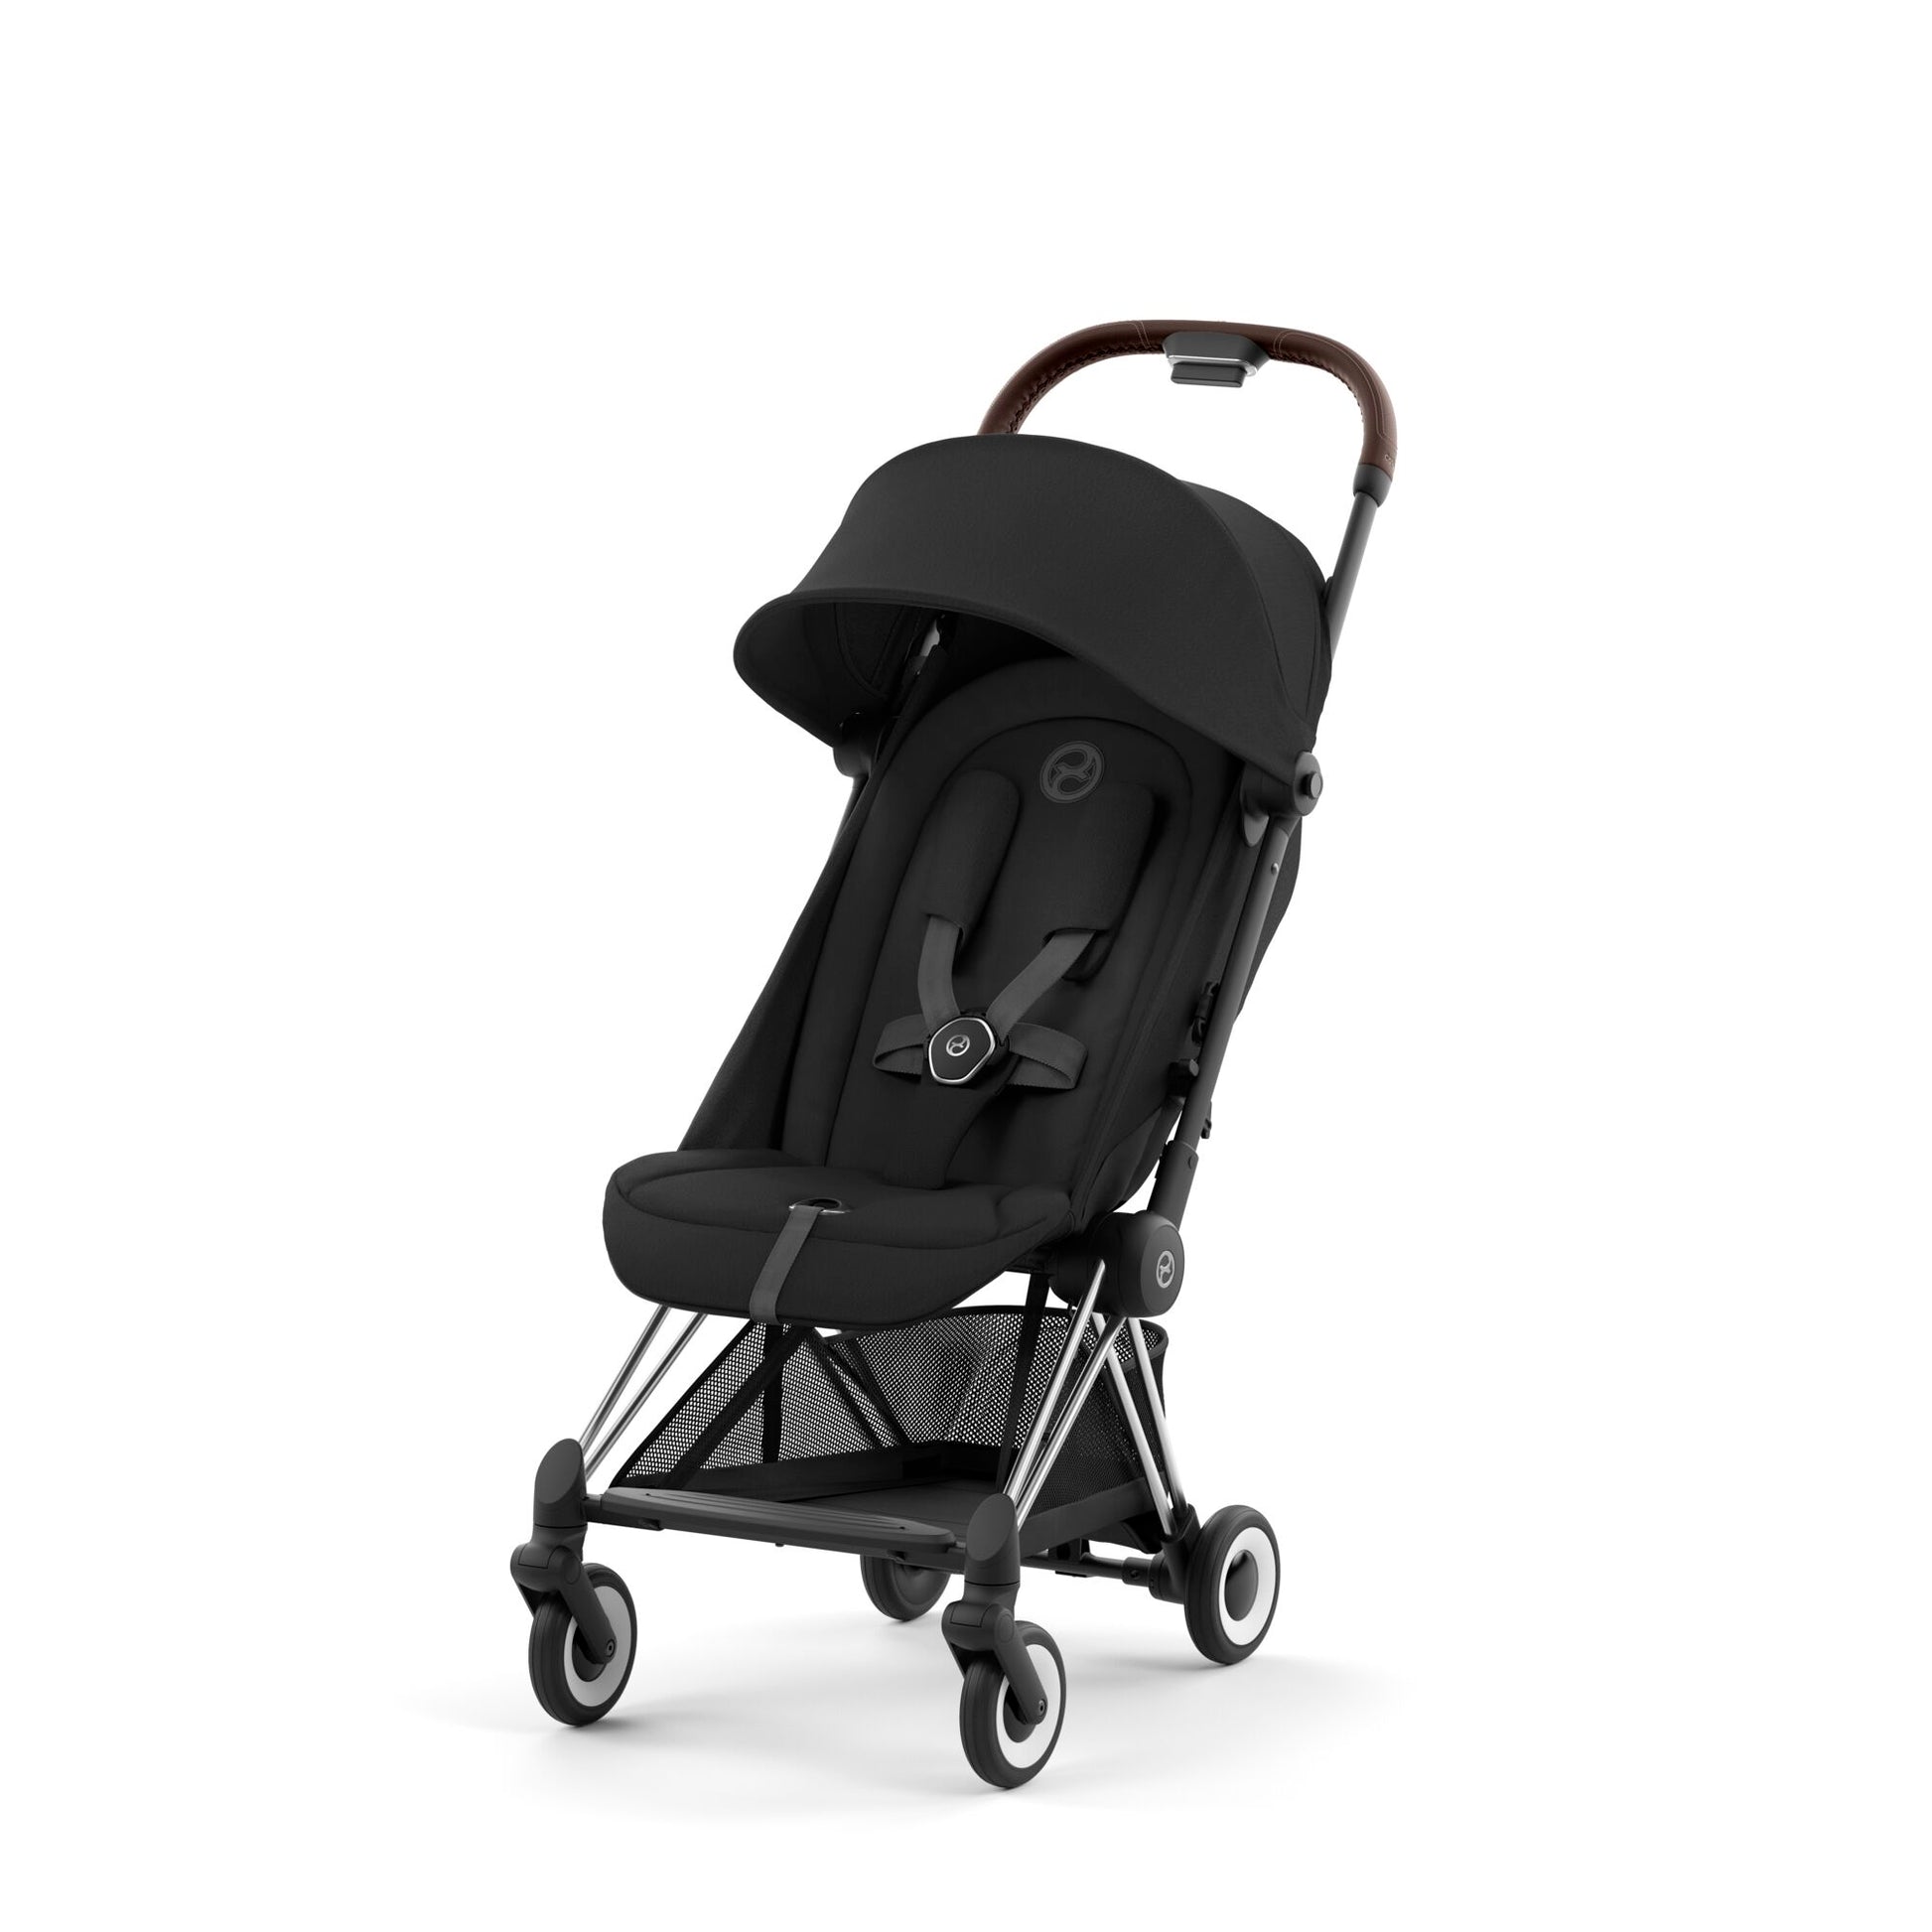  Cybex Priam 3 Complete Stroller, One-Hand Compact Fold